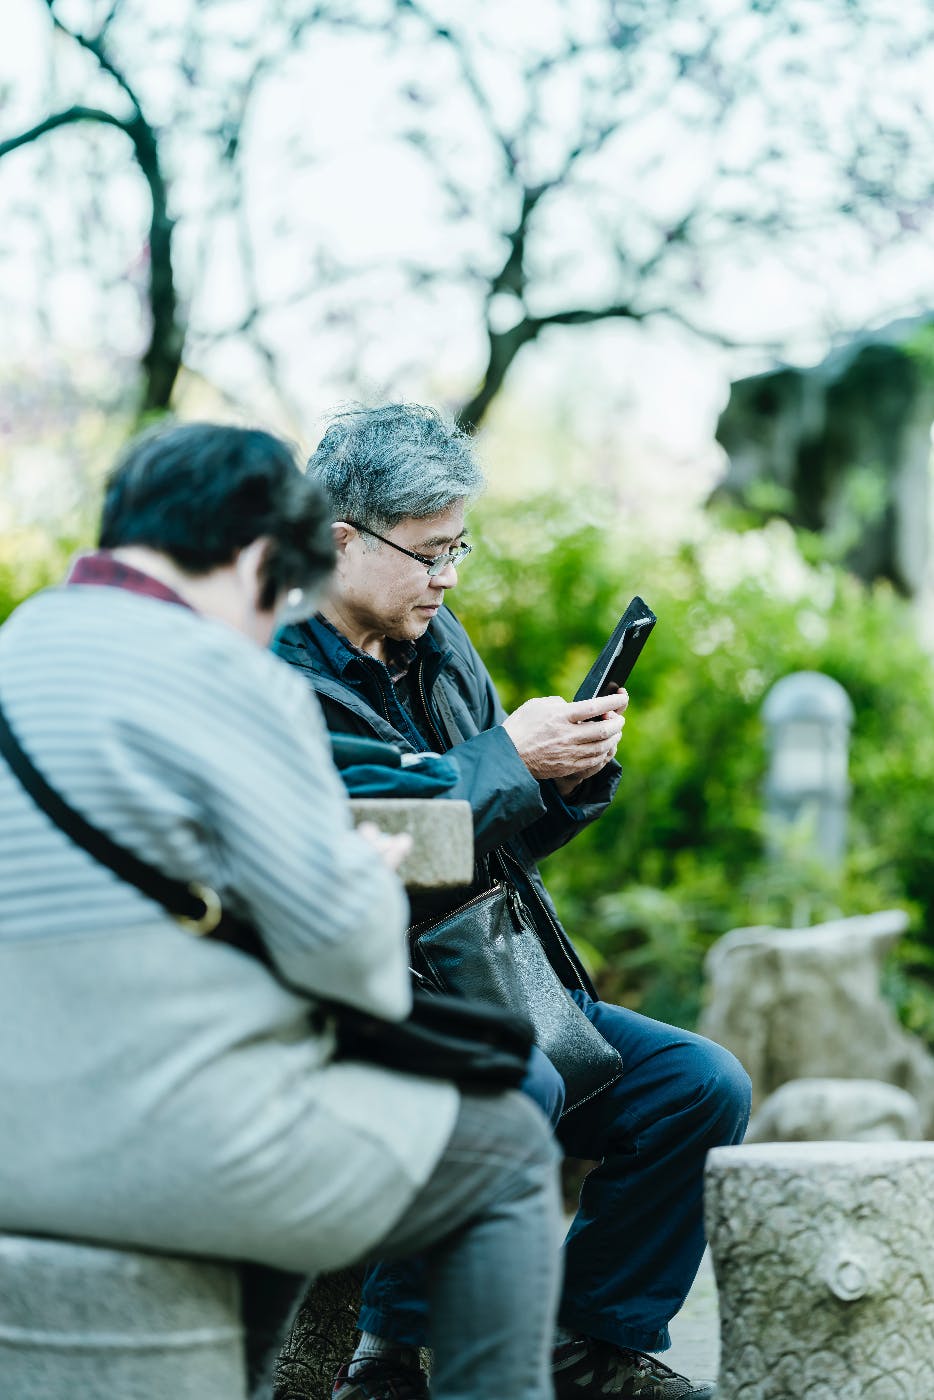 An older Chinese couple sitting on a stone bench looking at their smartphones